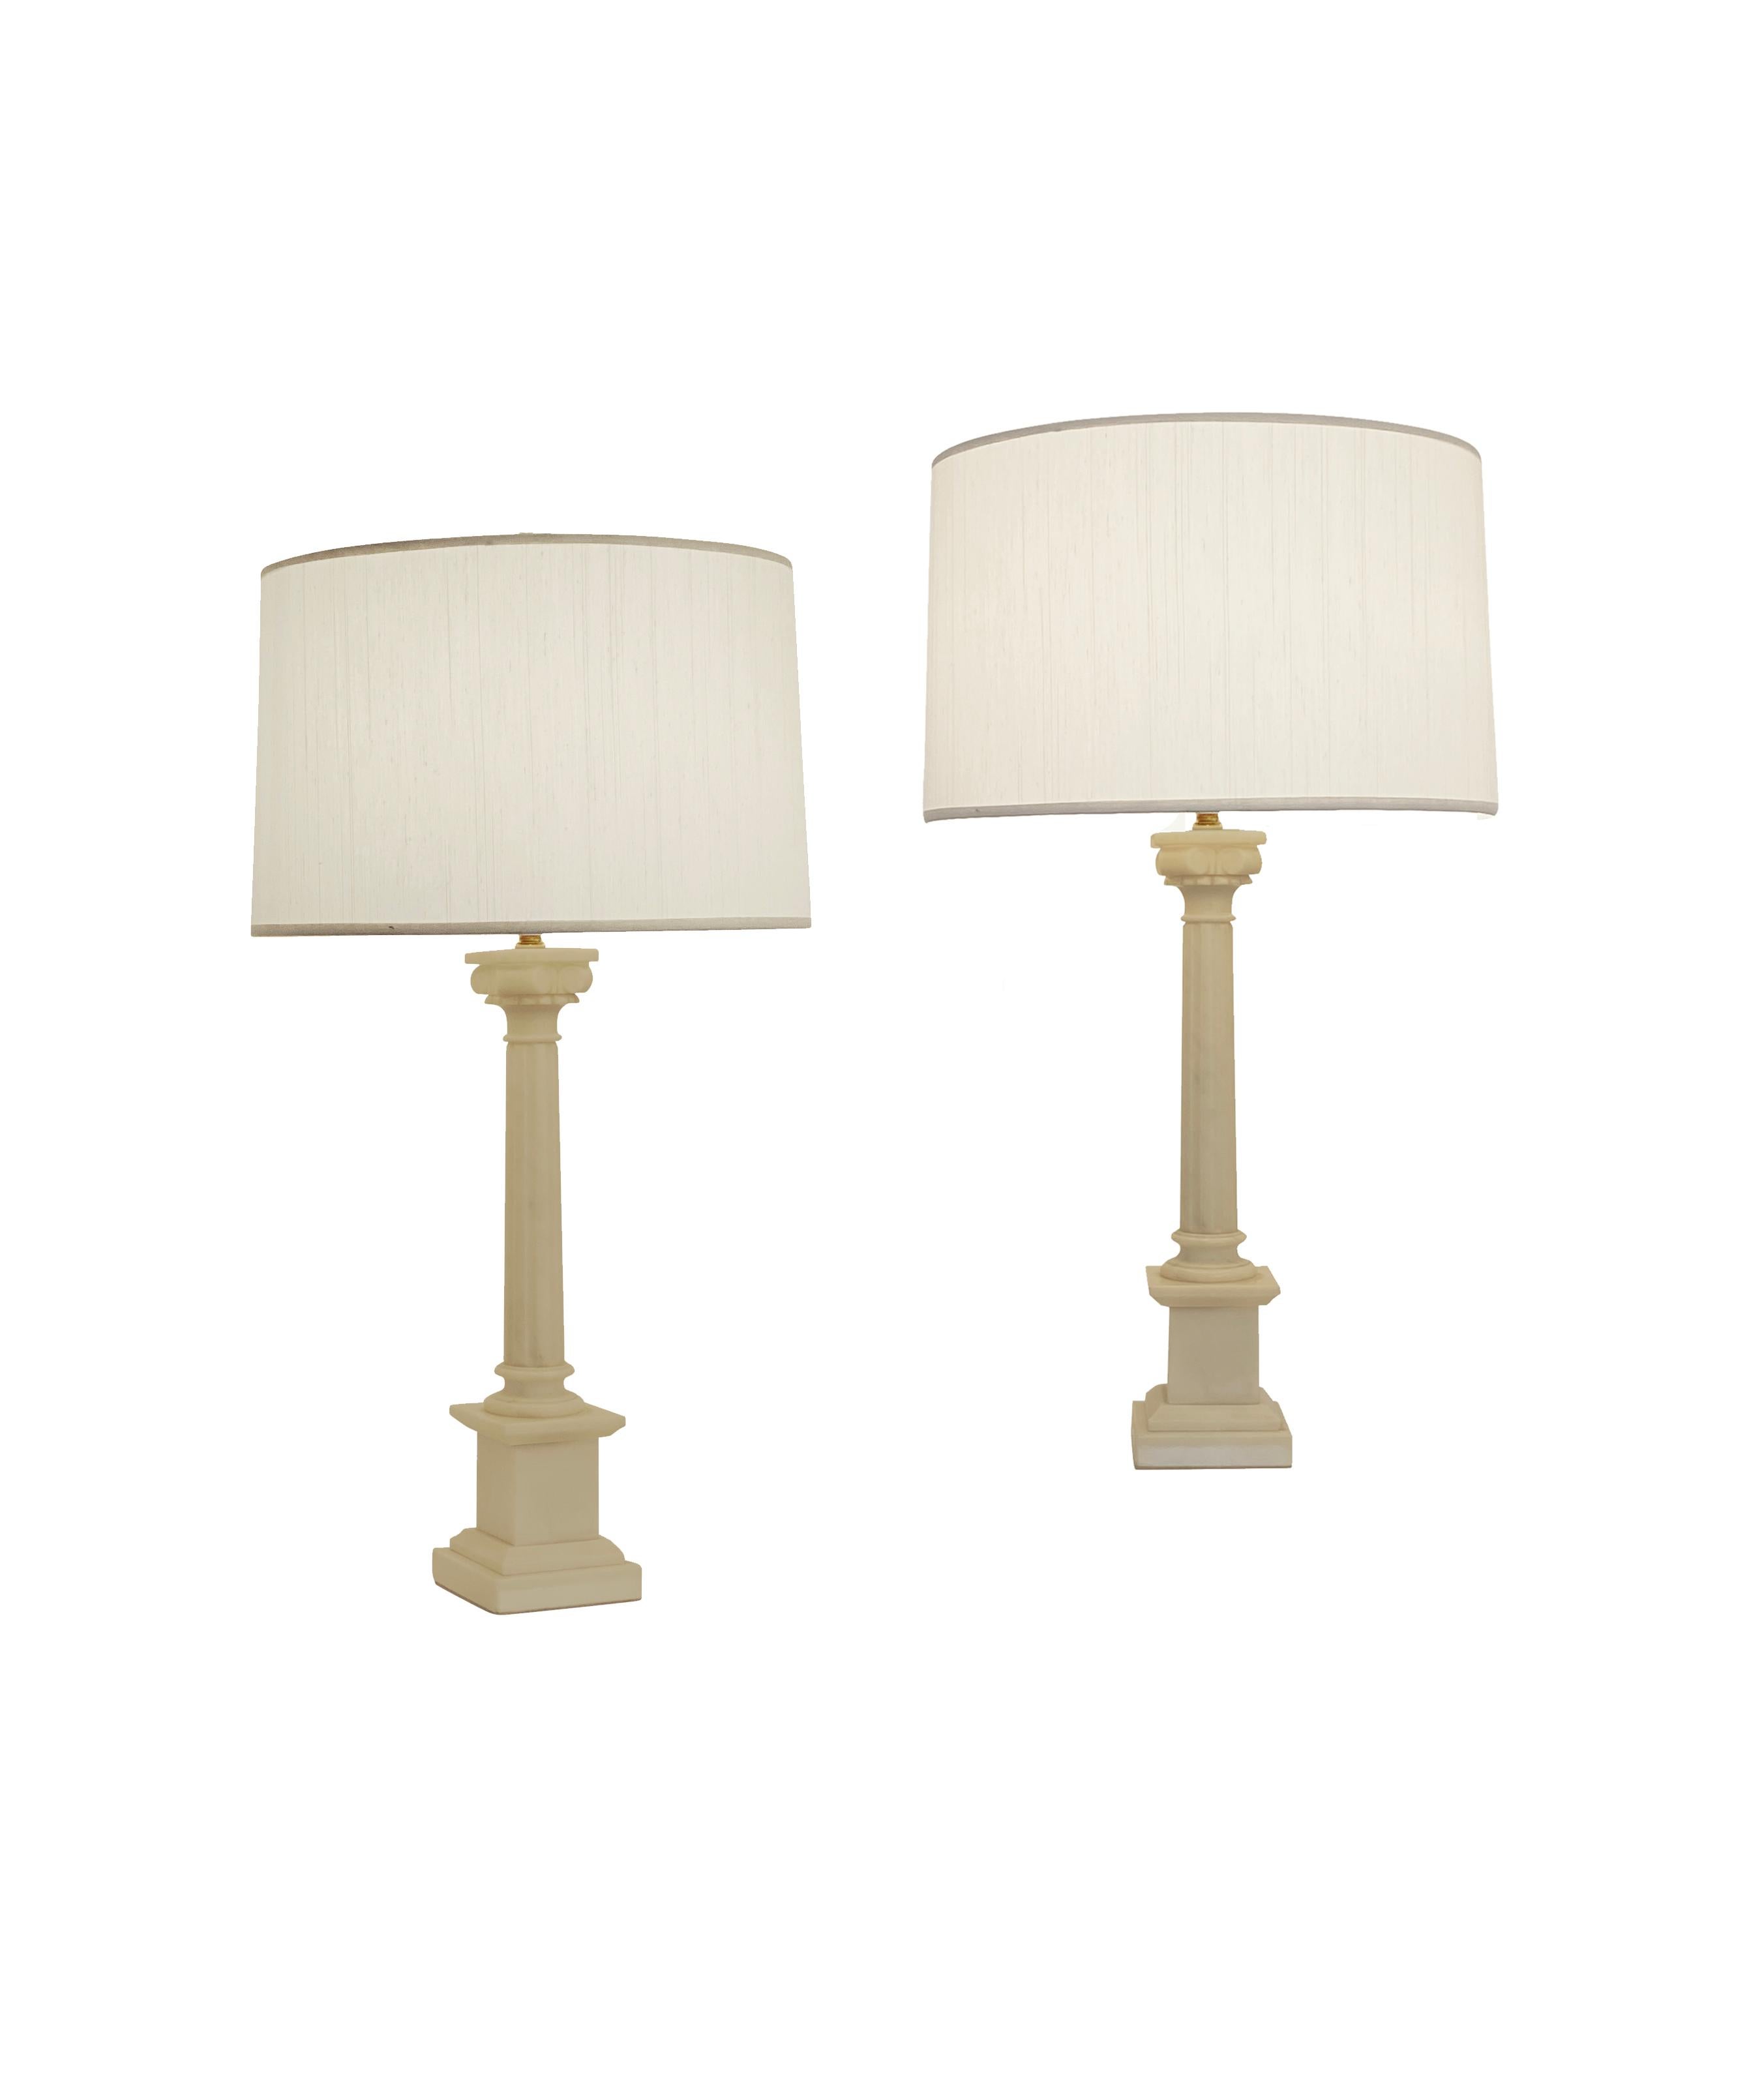 A beautiful pair of alabaster neoclassical Corinthian table lamps with silk ivory lamp shades. Alabaster marble features natural yellowing and some minor chips or scratches throughout given age. Shades are new and lamps also feature new brass